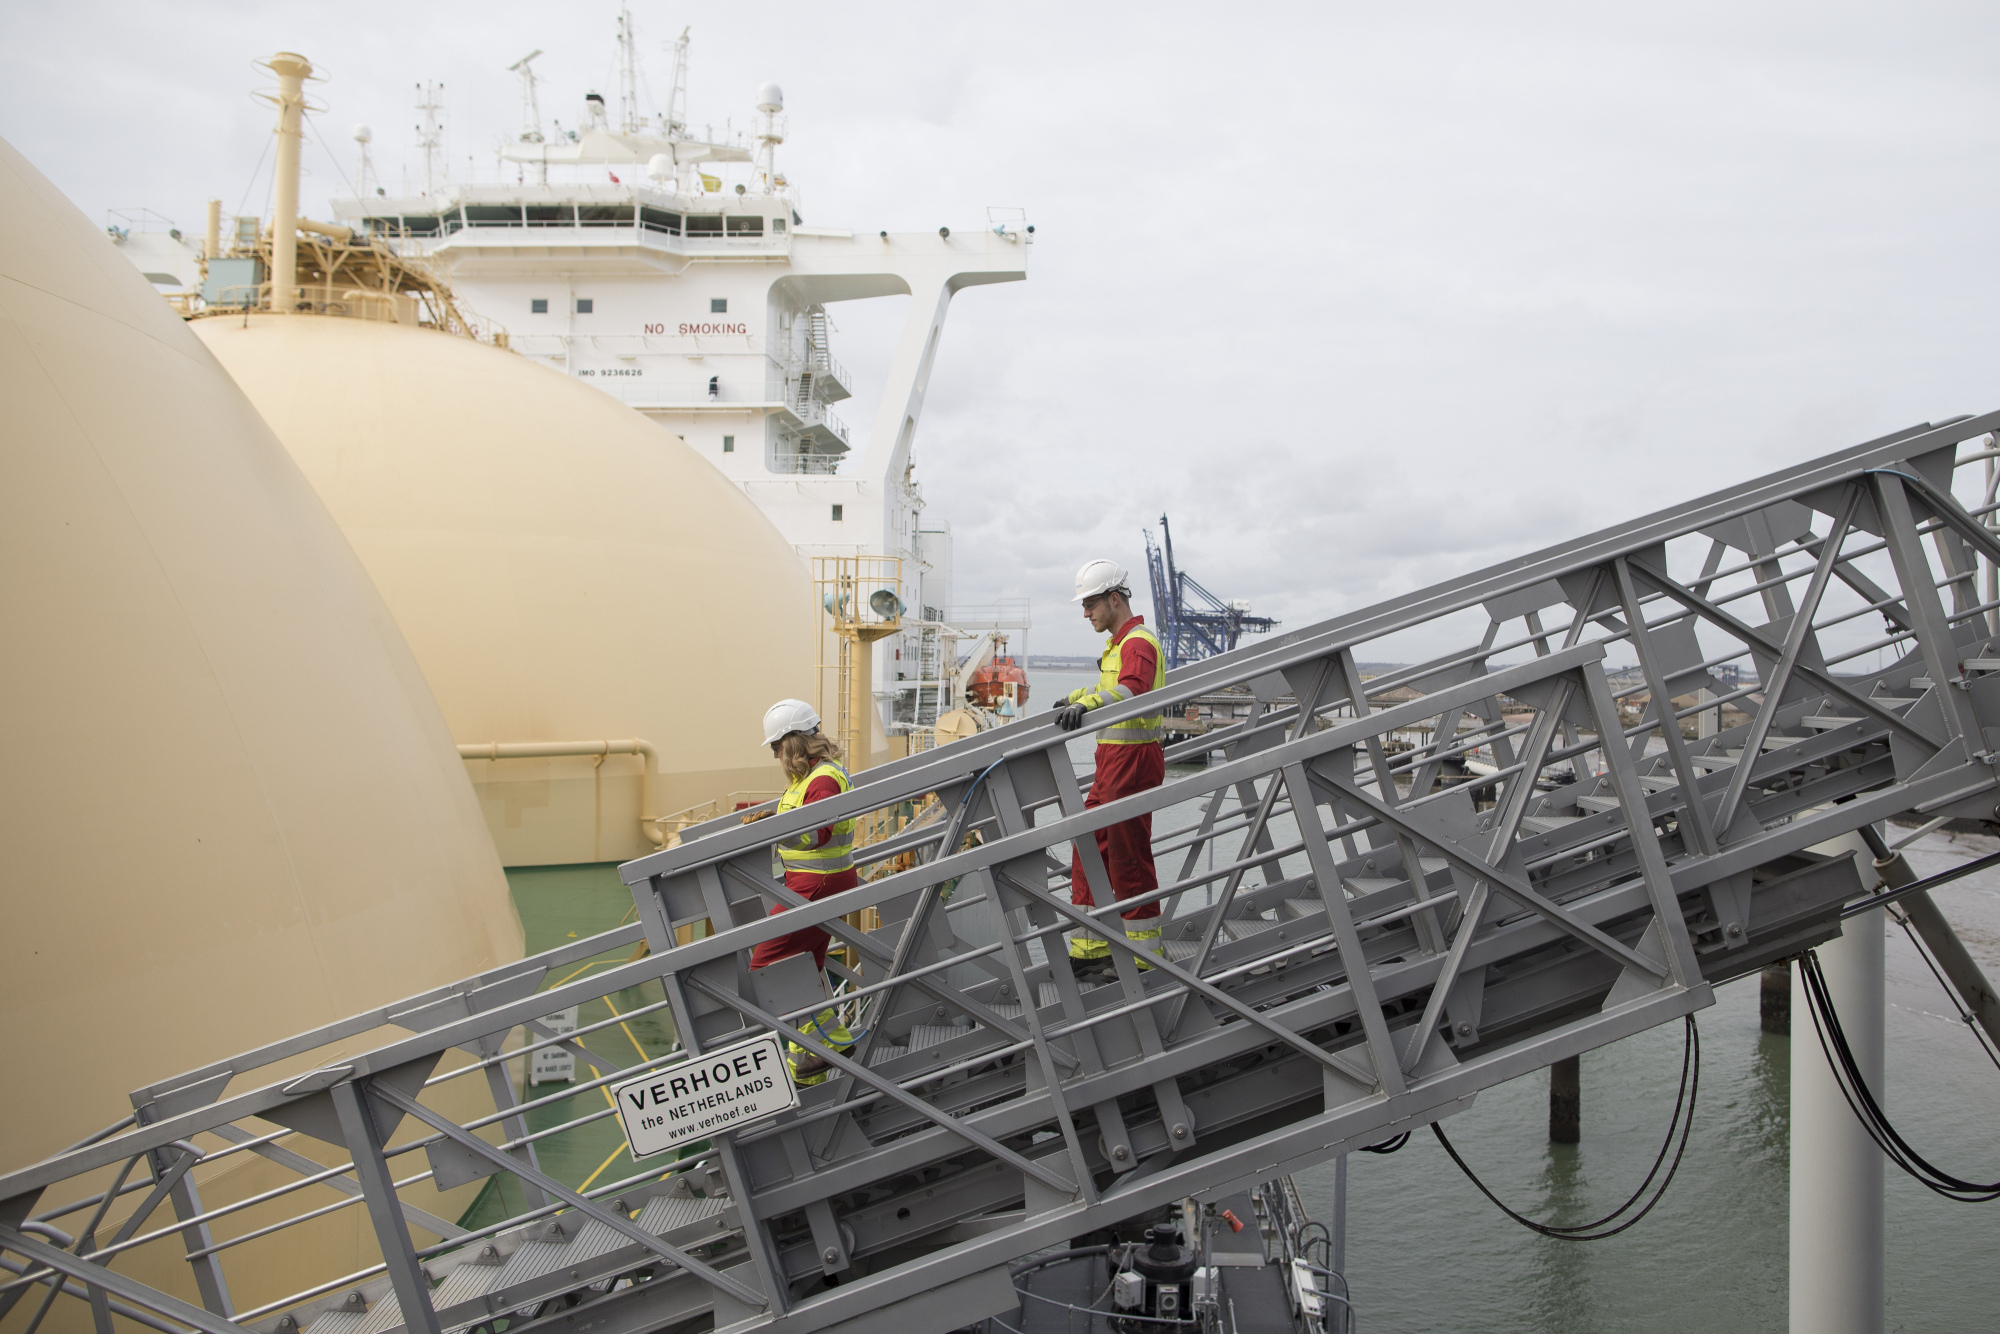 Shipment Of Liquefied Natural Gas (LNG) Arrives At National Grid Plc's GrainLNG Plant 